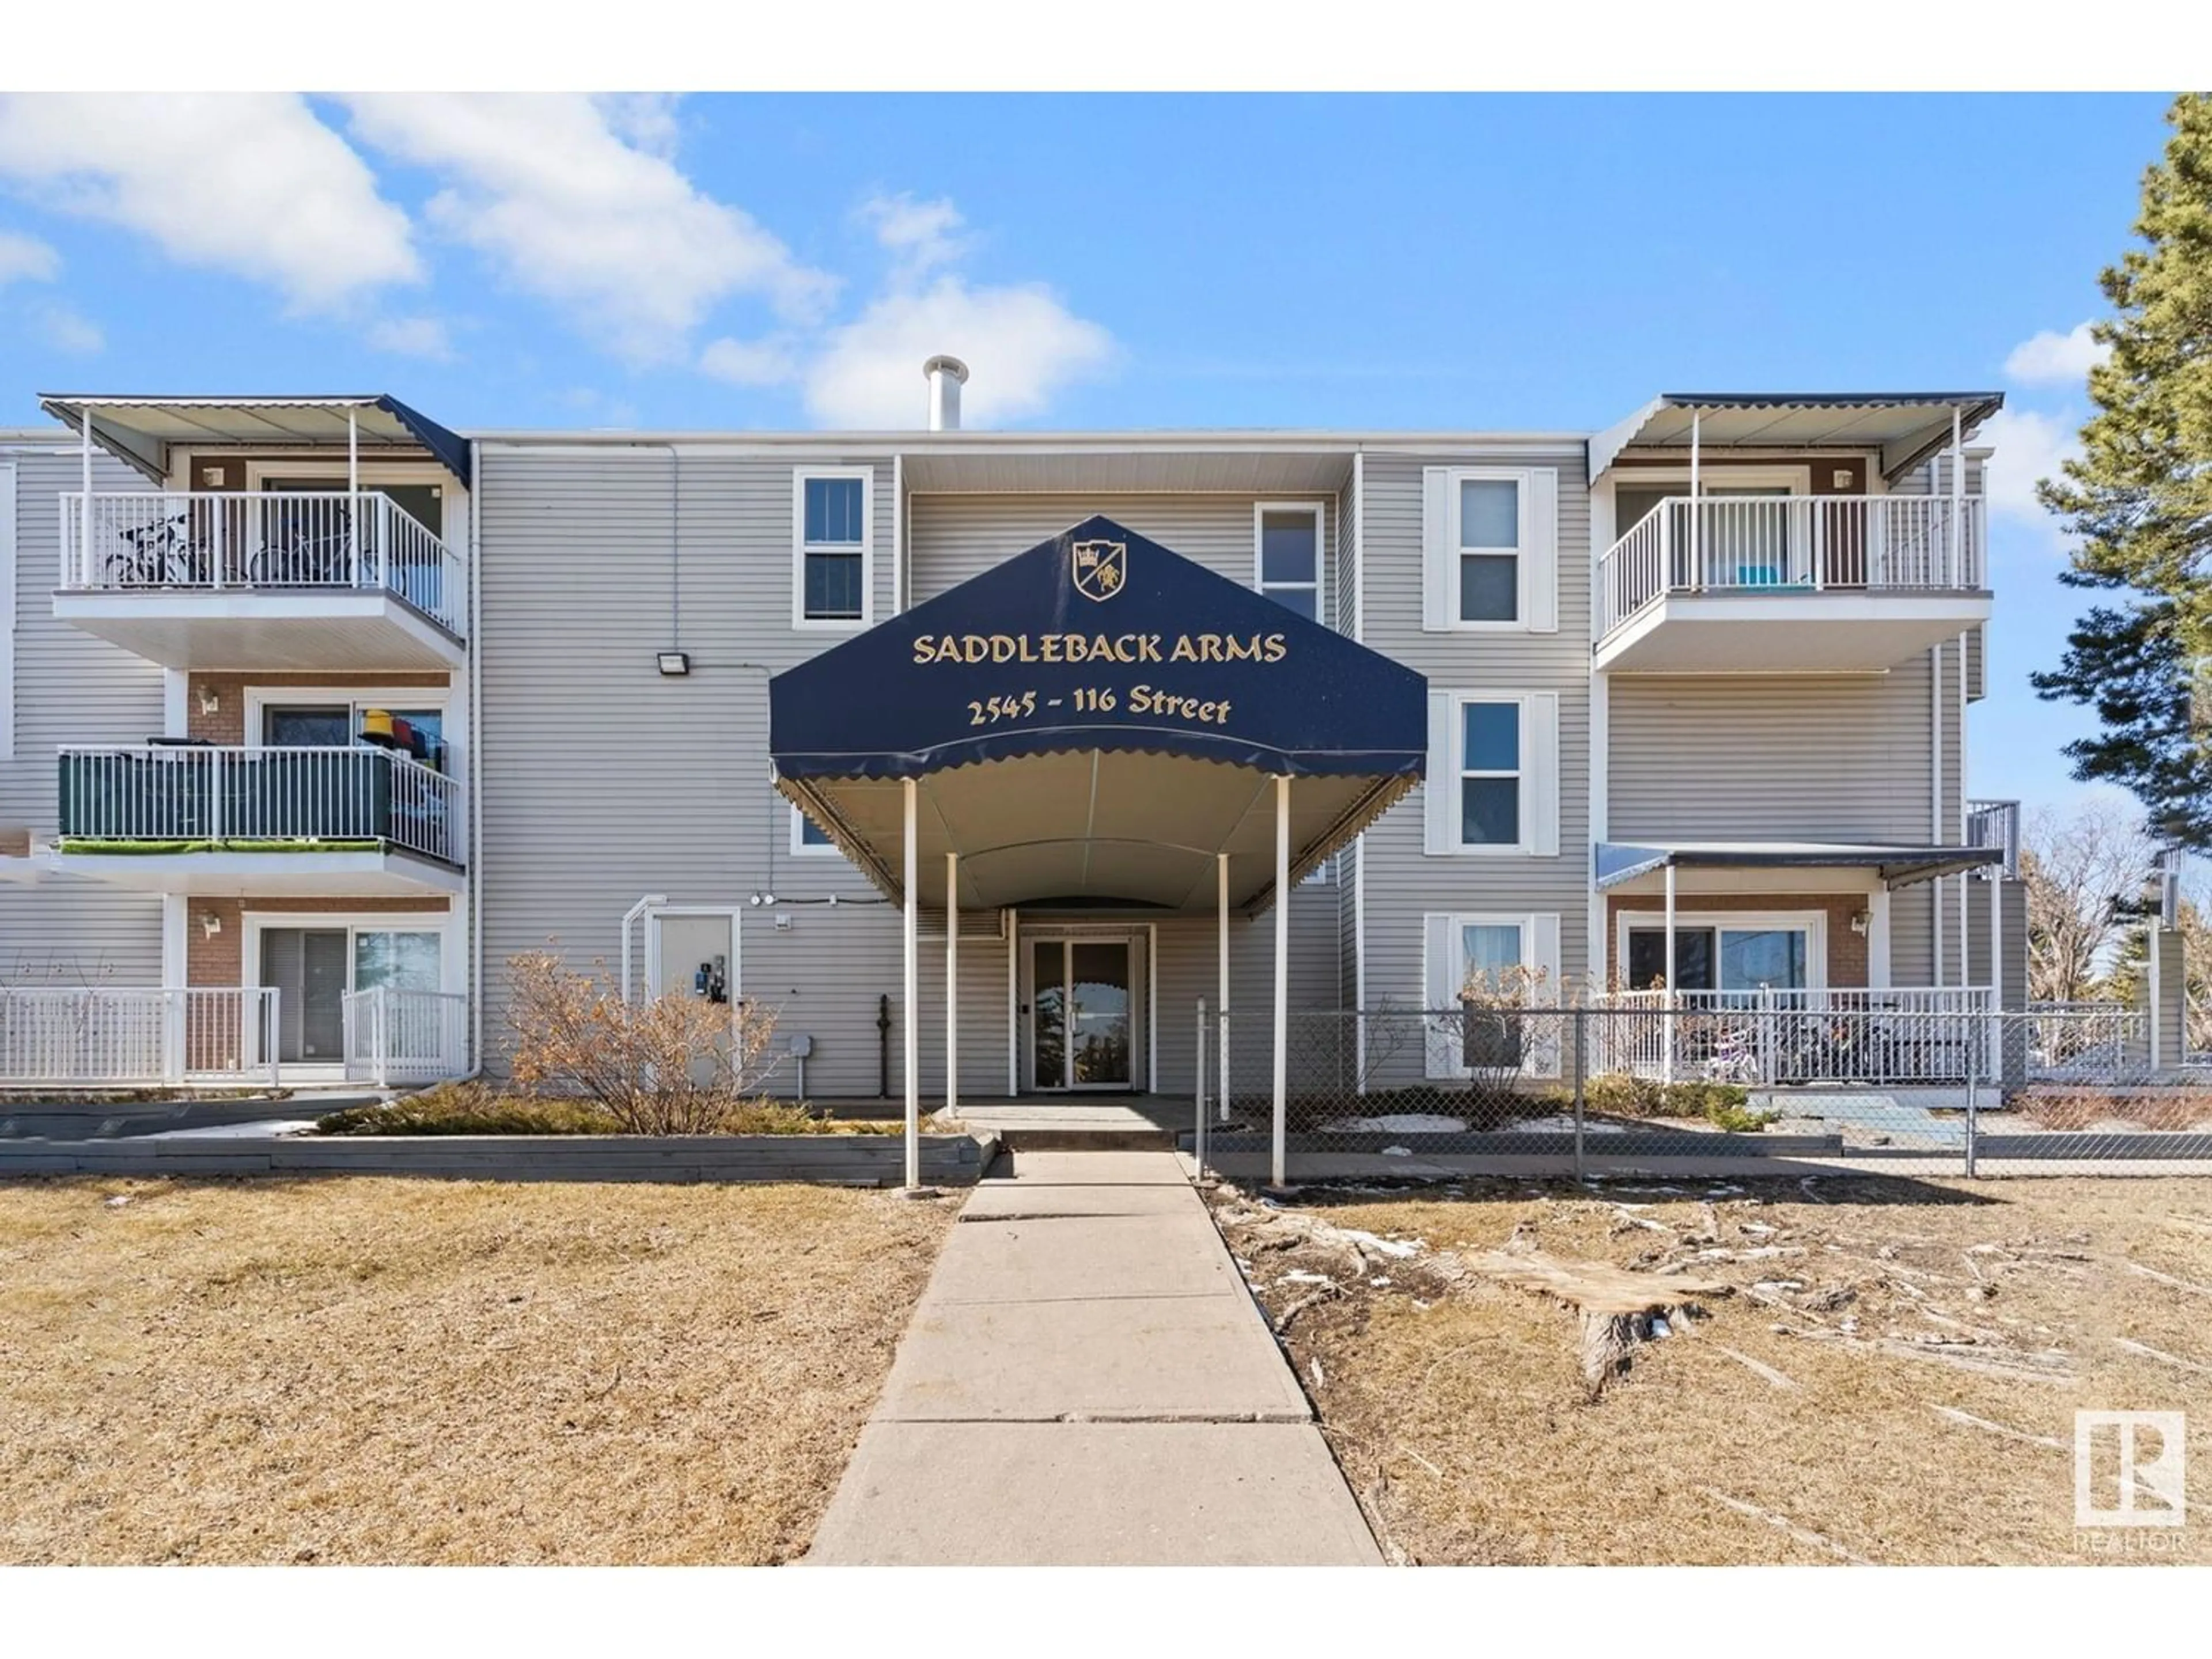 A pic from exterior of the house or condo for #209 2545 116 ST NW, Edmonton Alberta T6J3Z7